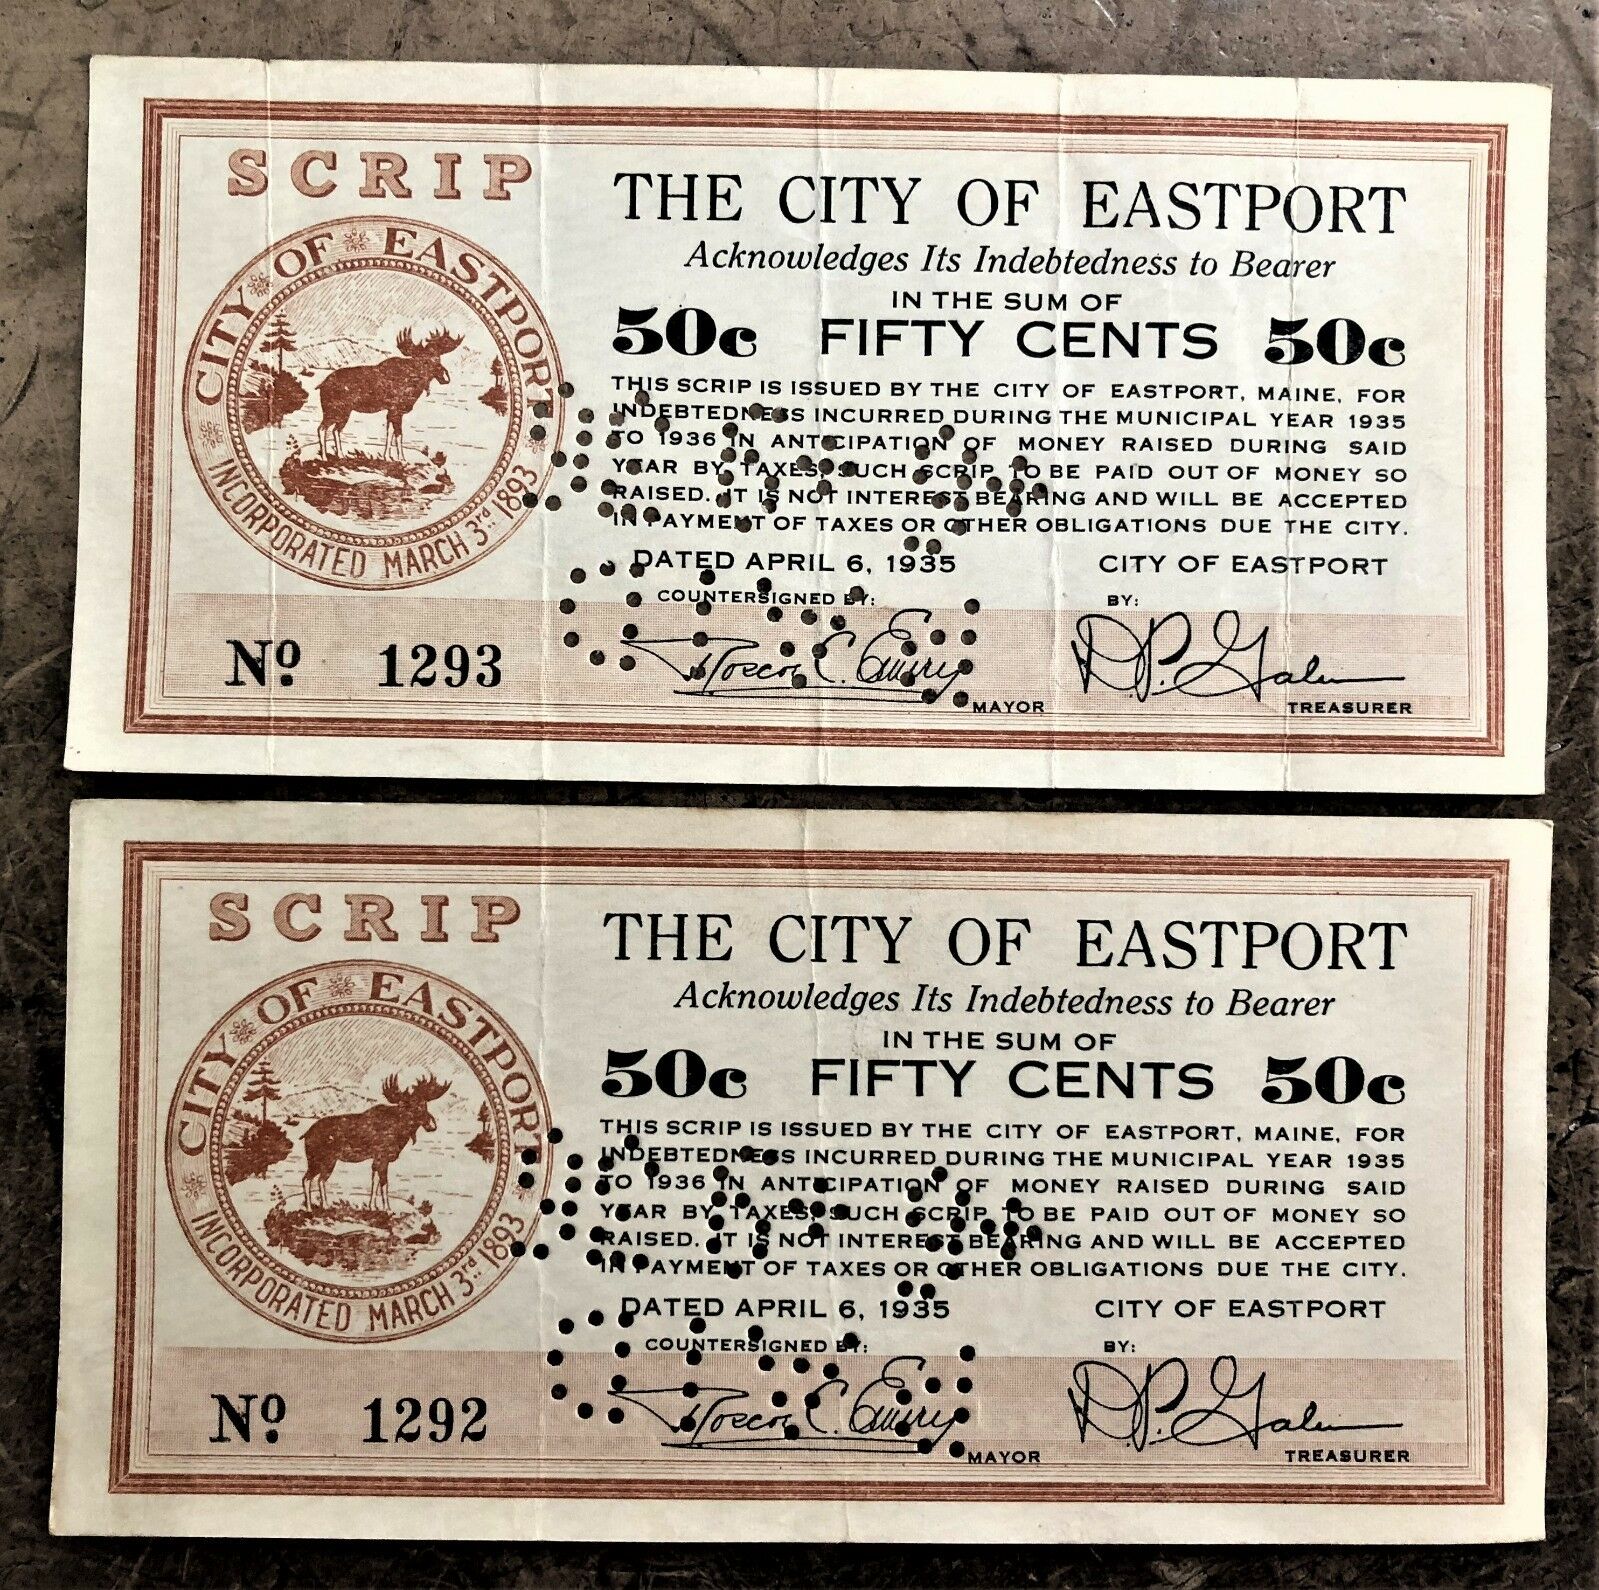 2 CONSECUTIVE 50¢ EASTPORT MAINE DEPRESSION SCRIP NOTES of 1935 with MOOSE LOGO